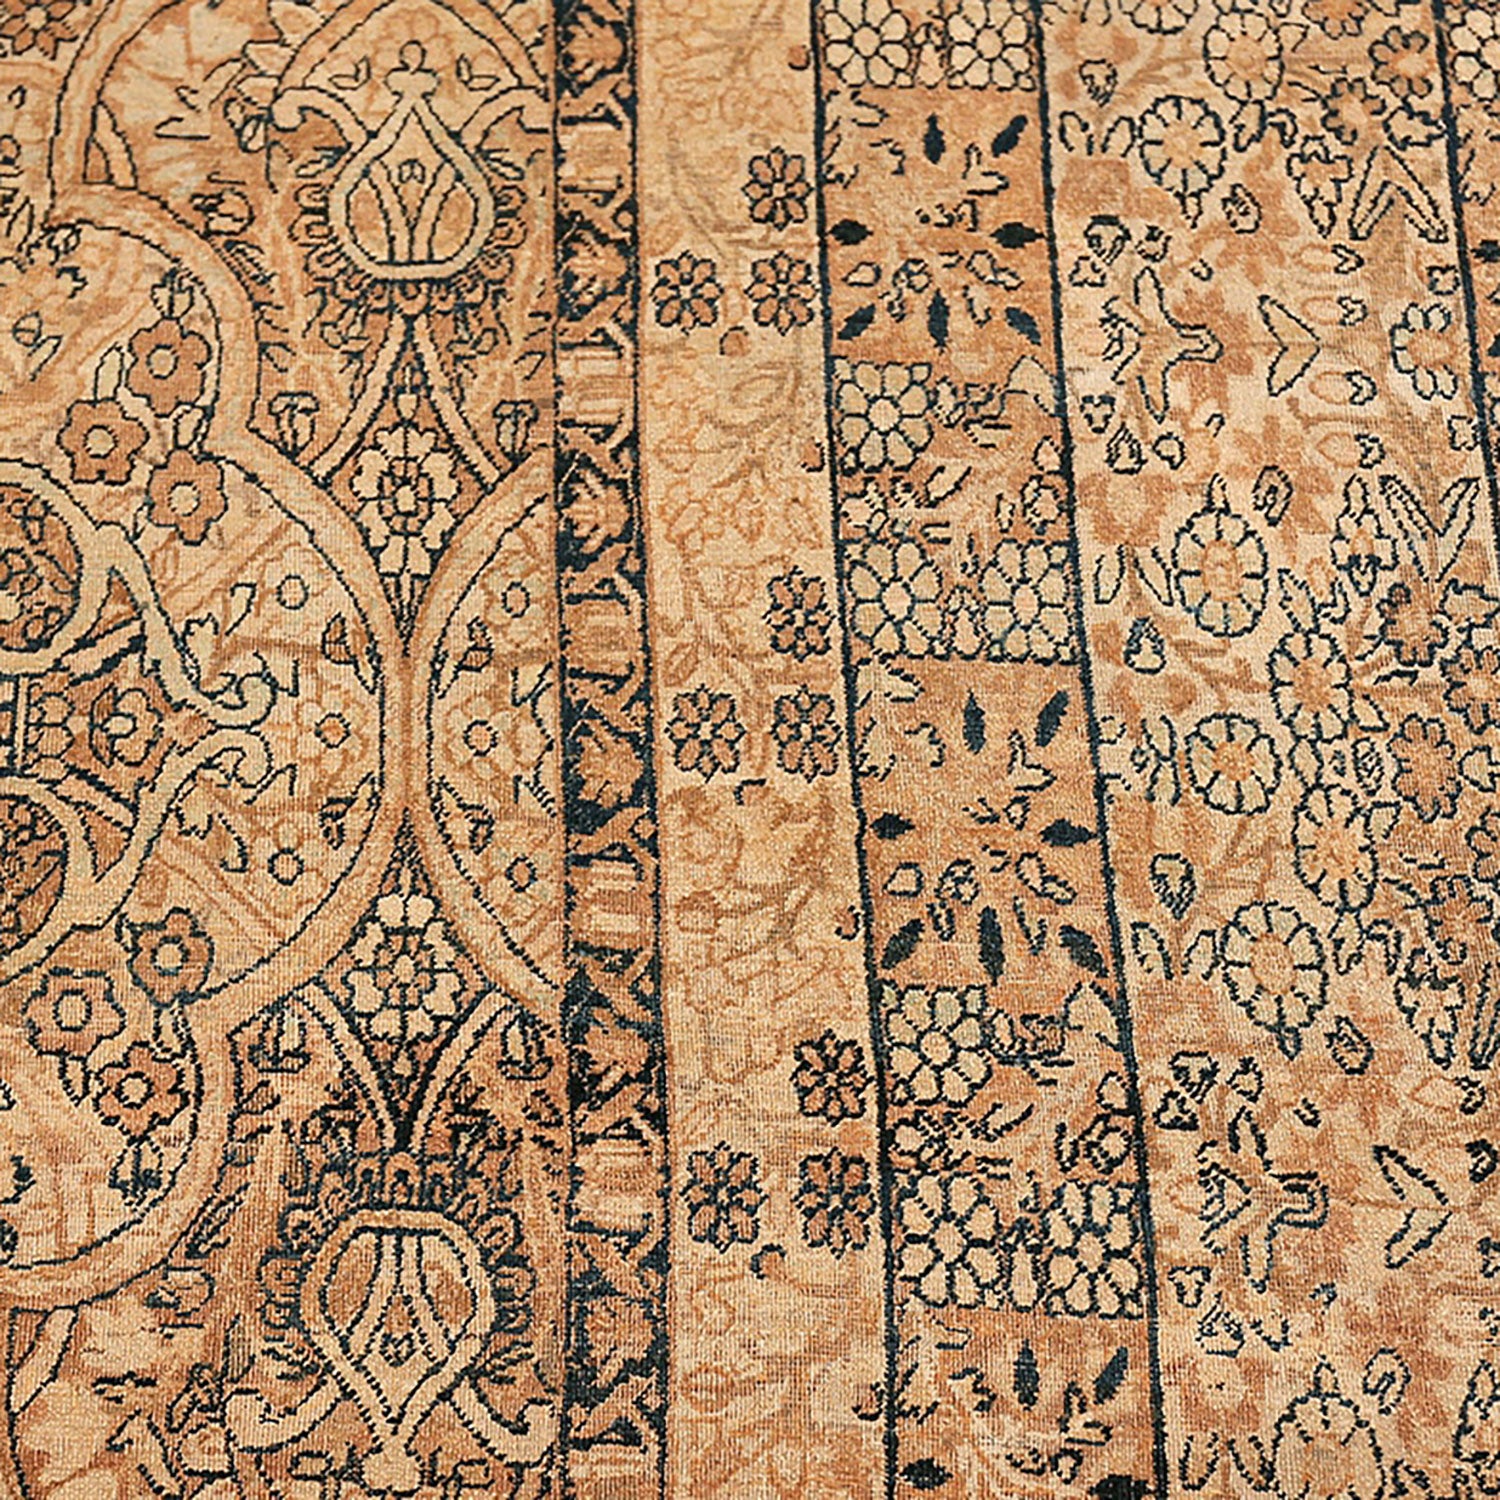 Close-up of an intricate patterned rug in warm earth tones.